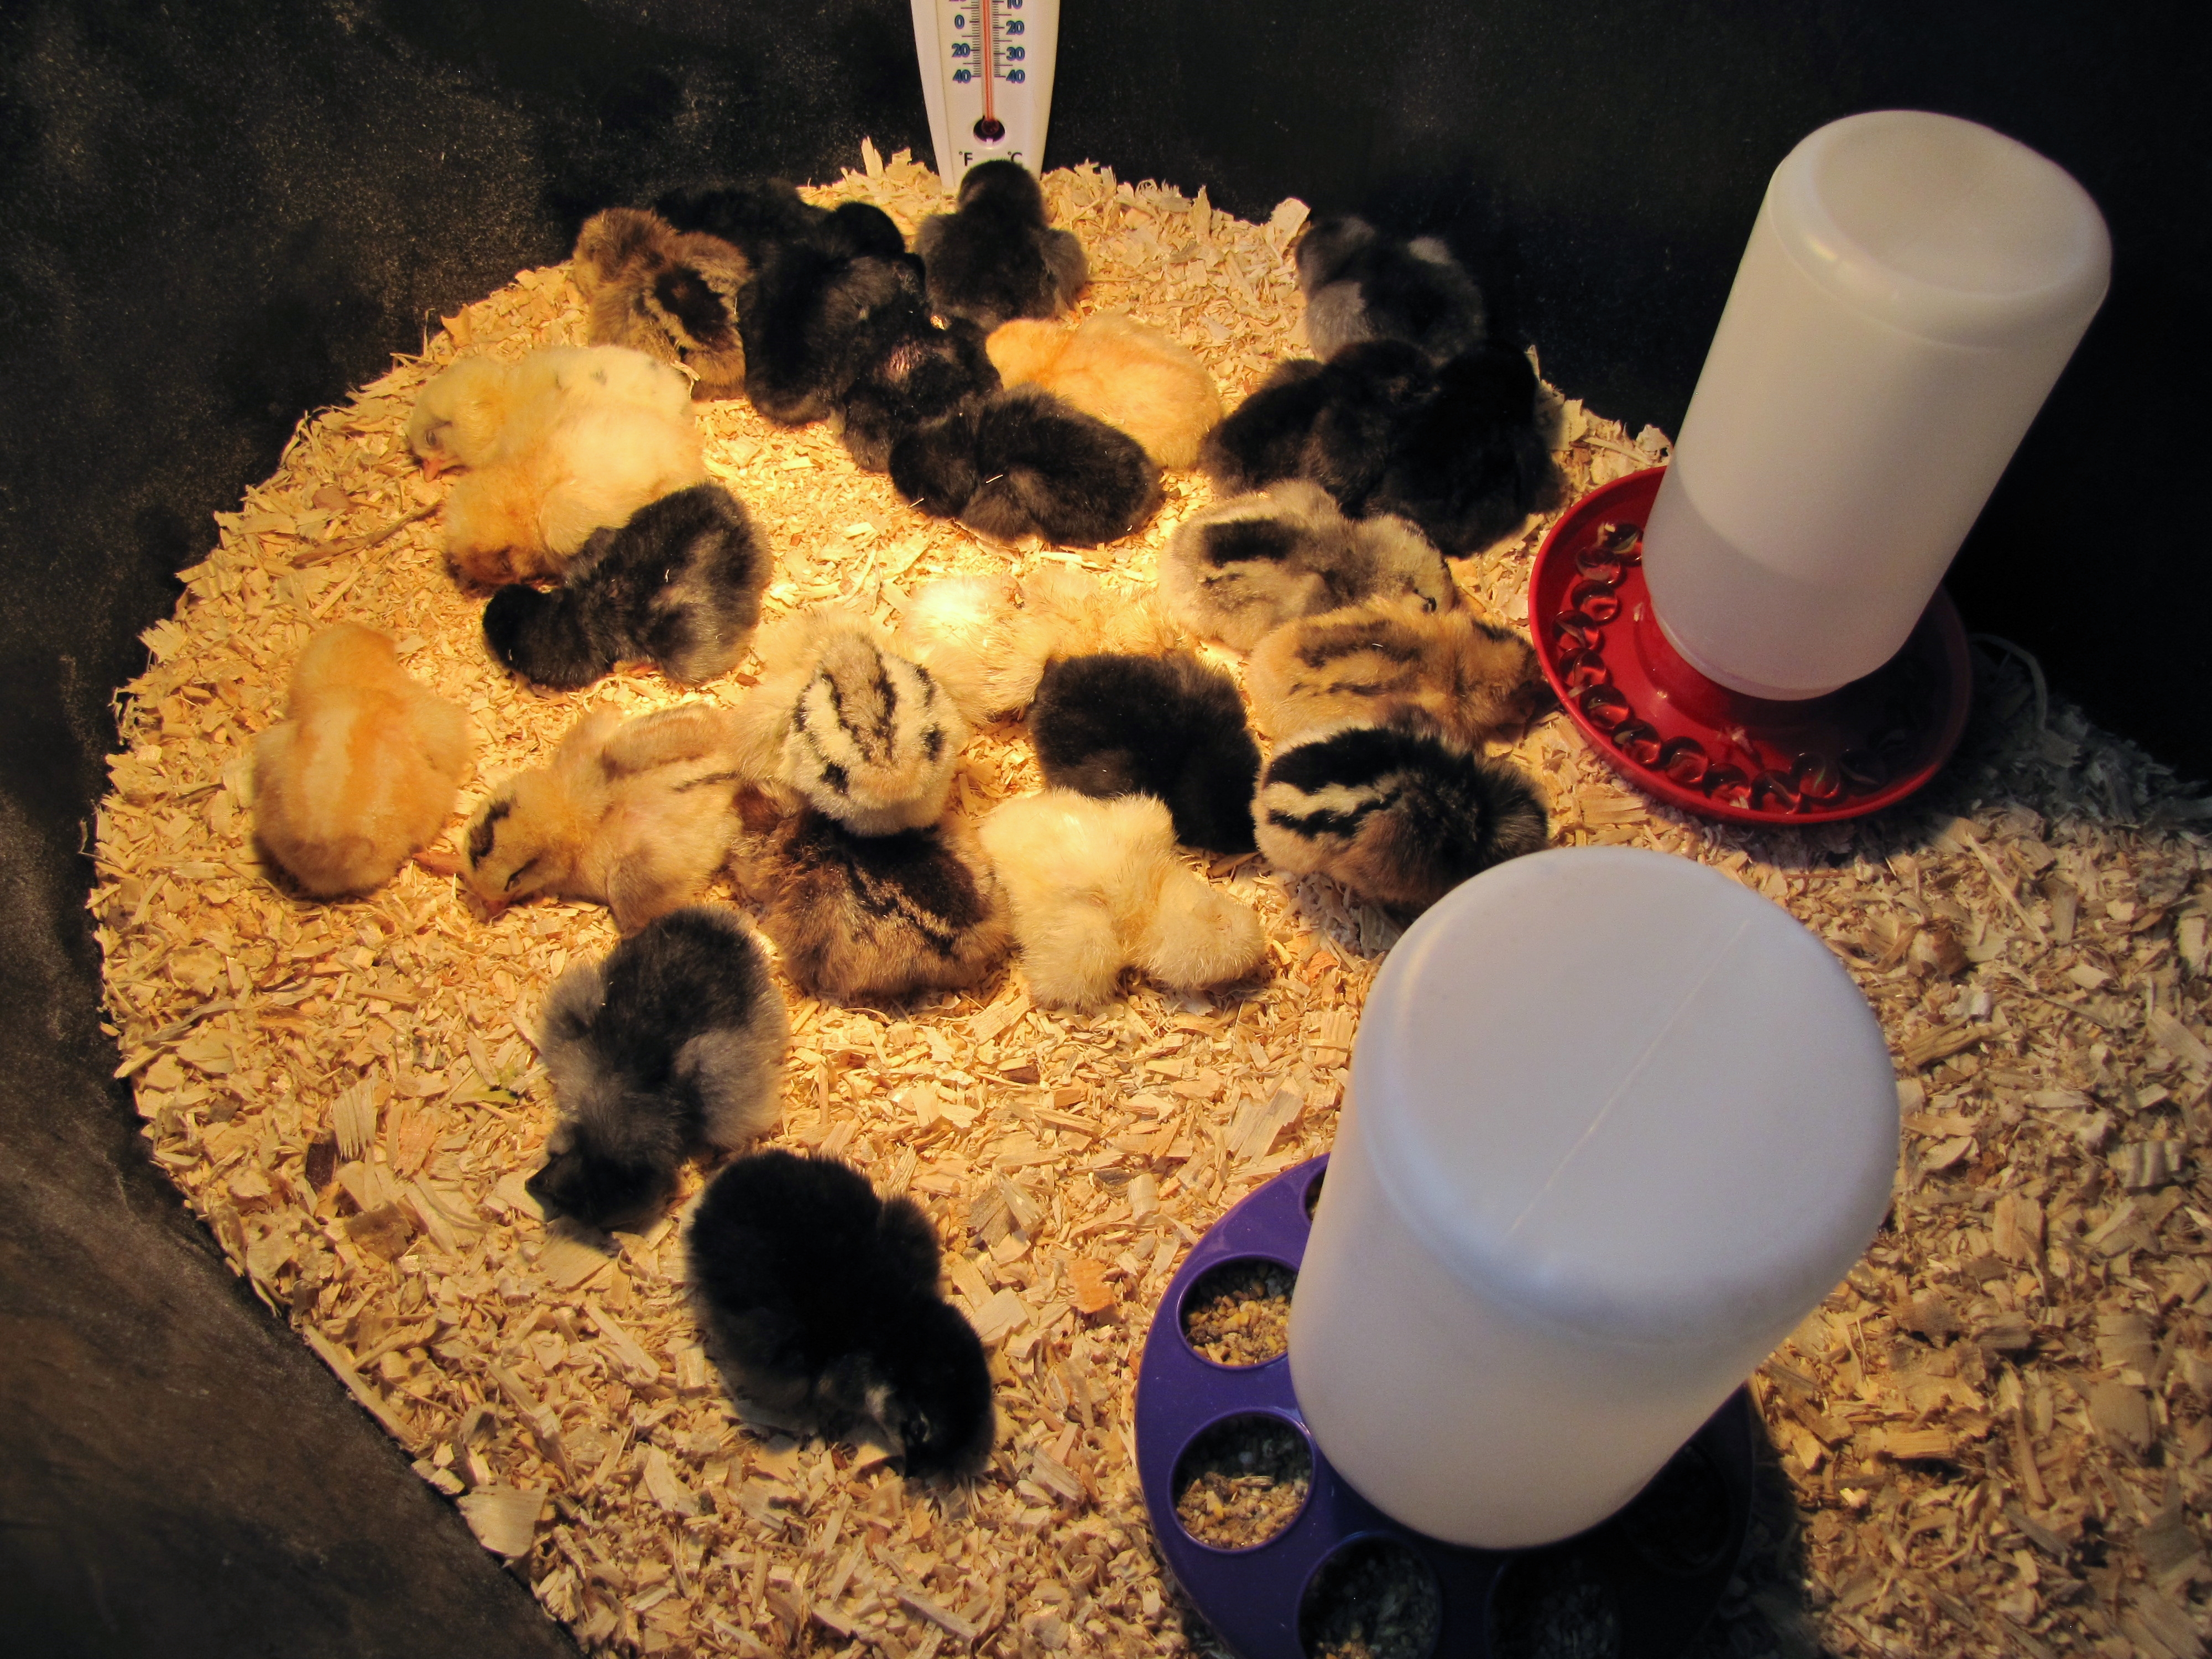 We just brought our newly hatched chicks home from a friend's home!  They are settling in nicely to their new brooder space.  Our whole family is so excited, this is our first time with chickens!